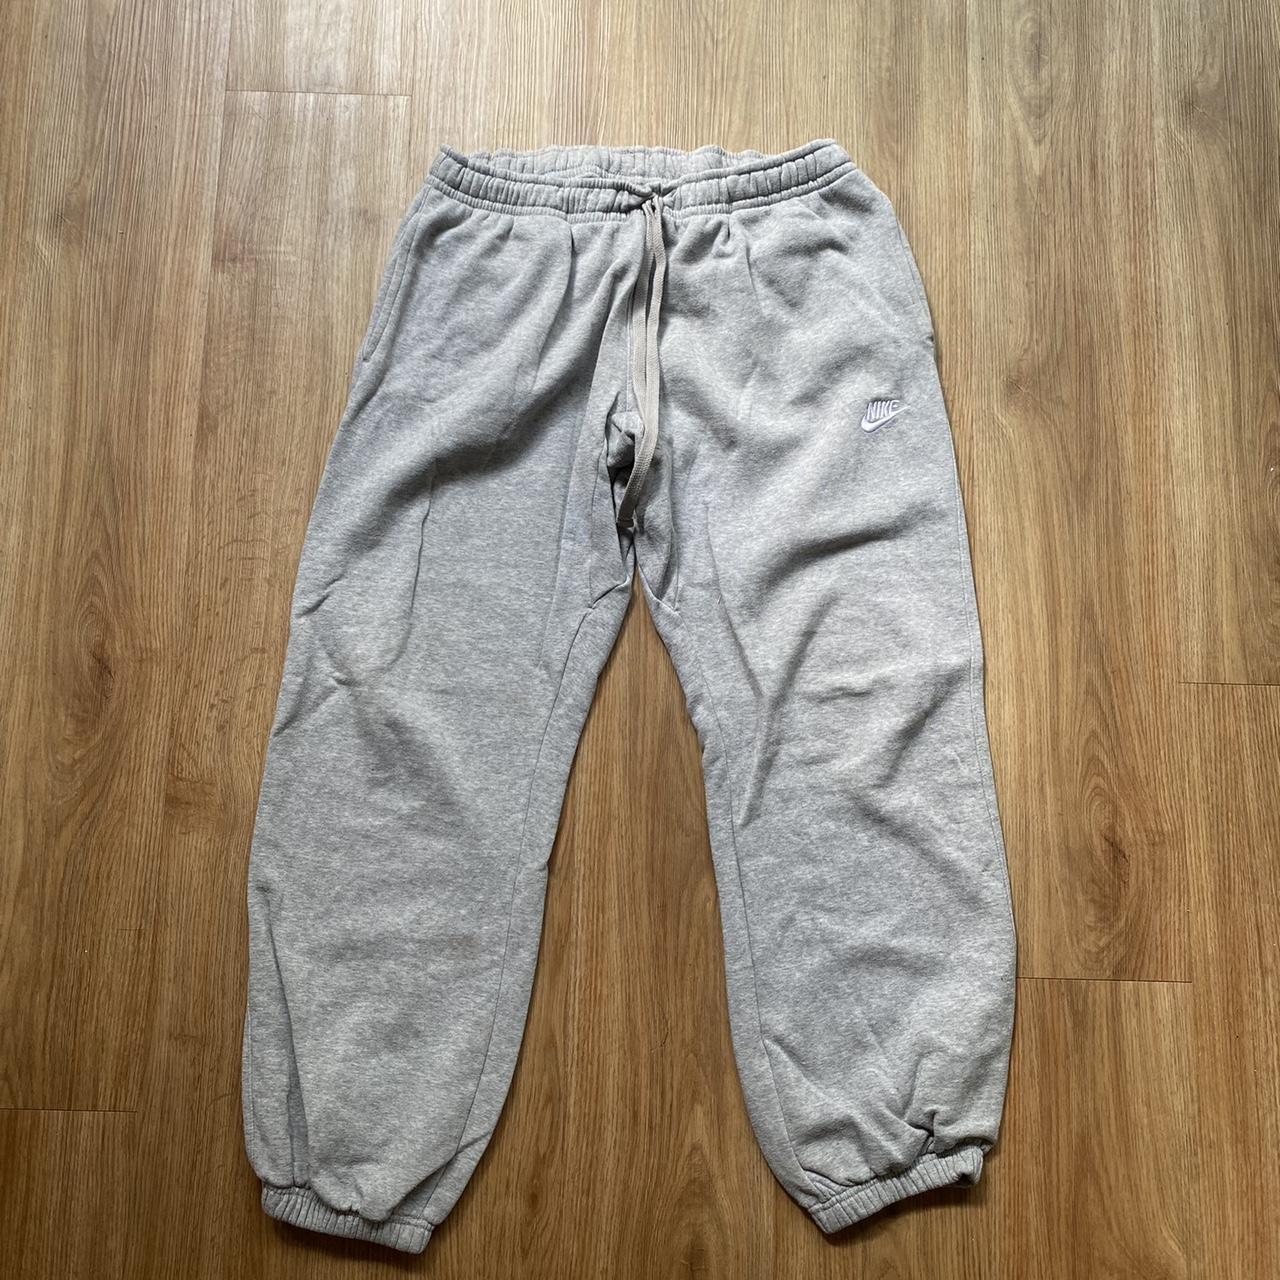 Nike Men's Grey and White Joggers-tracksuits | Depop